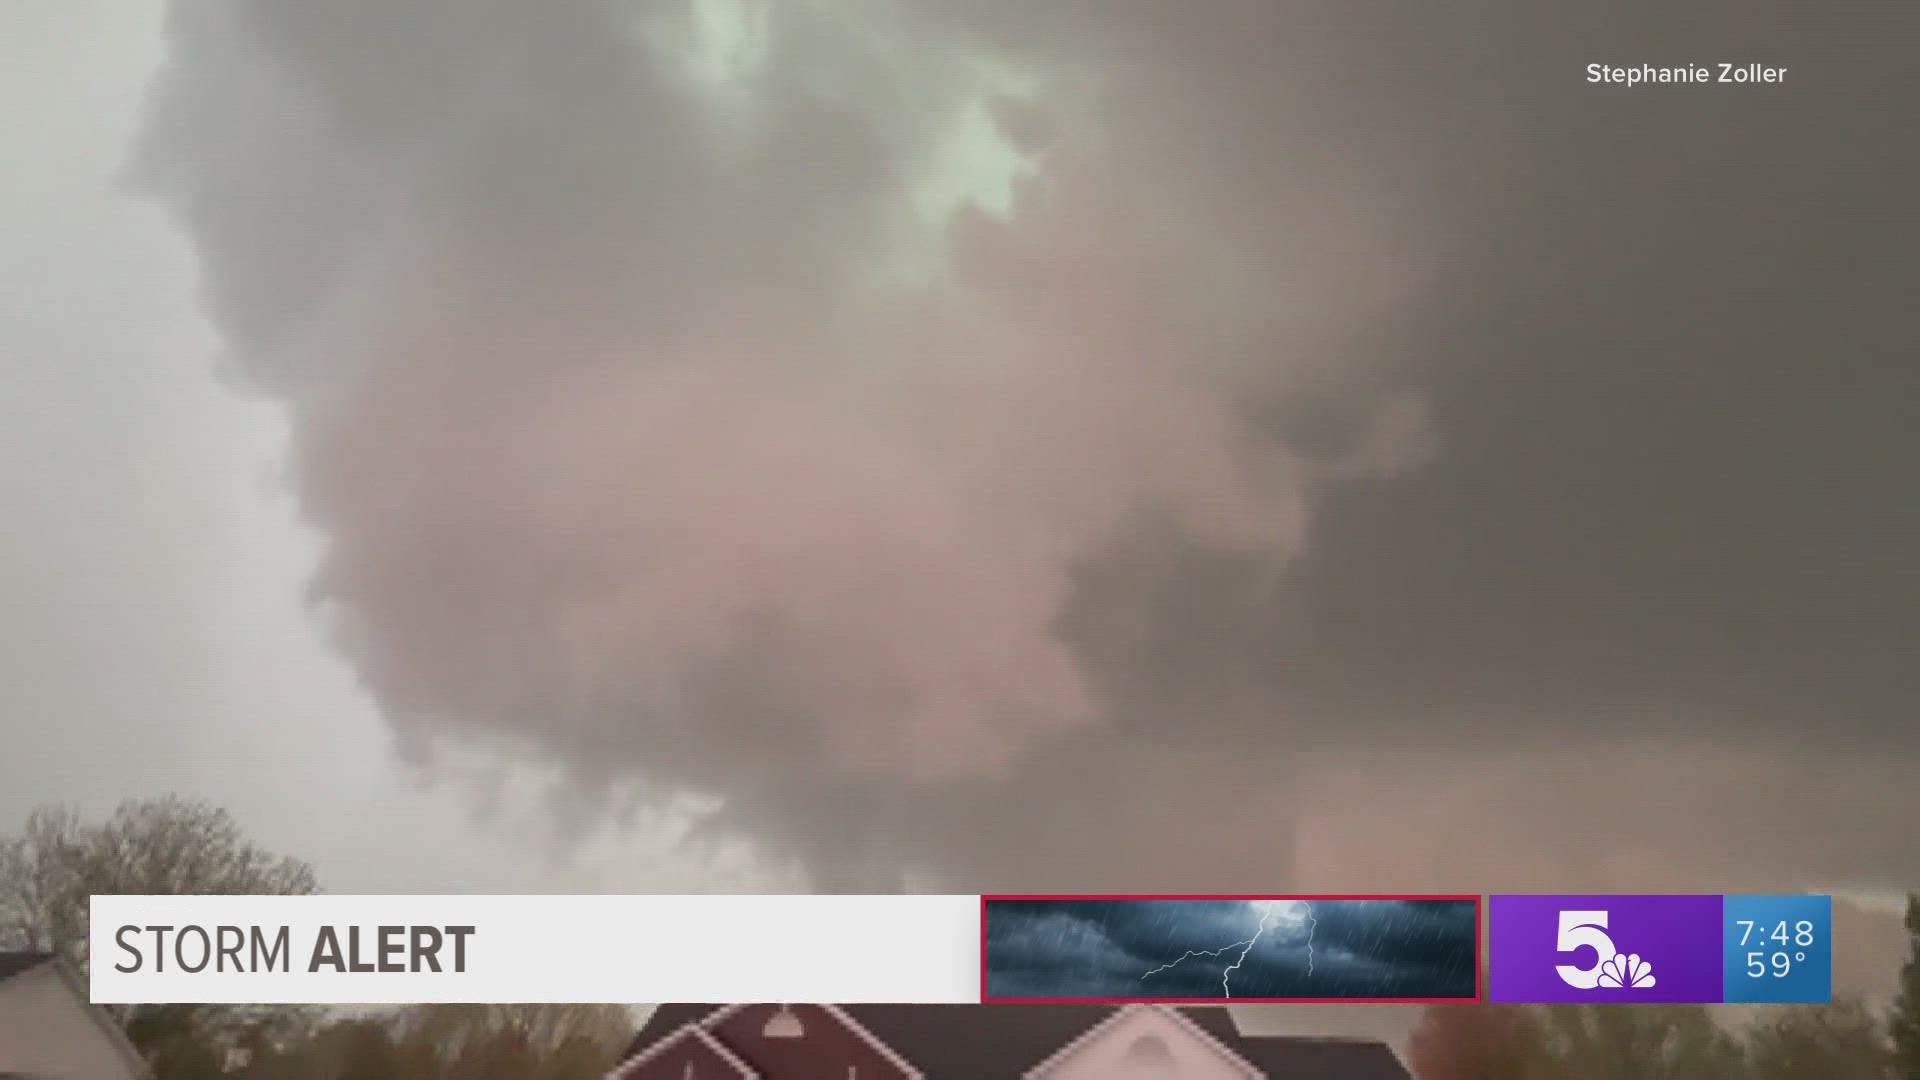 Video shows rotation over St. Louis County in April 15 storm